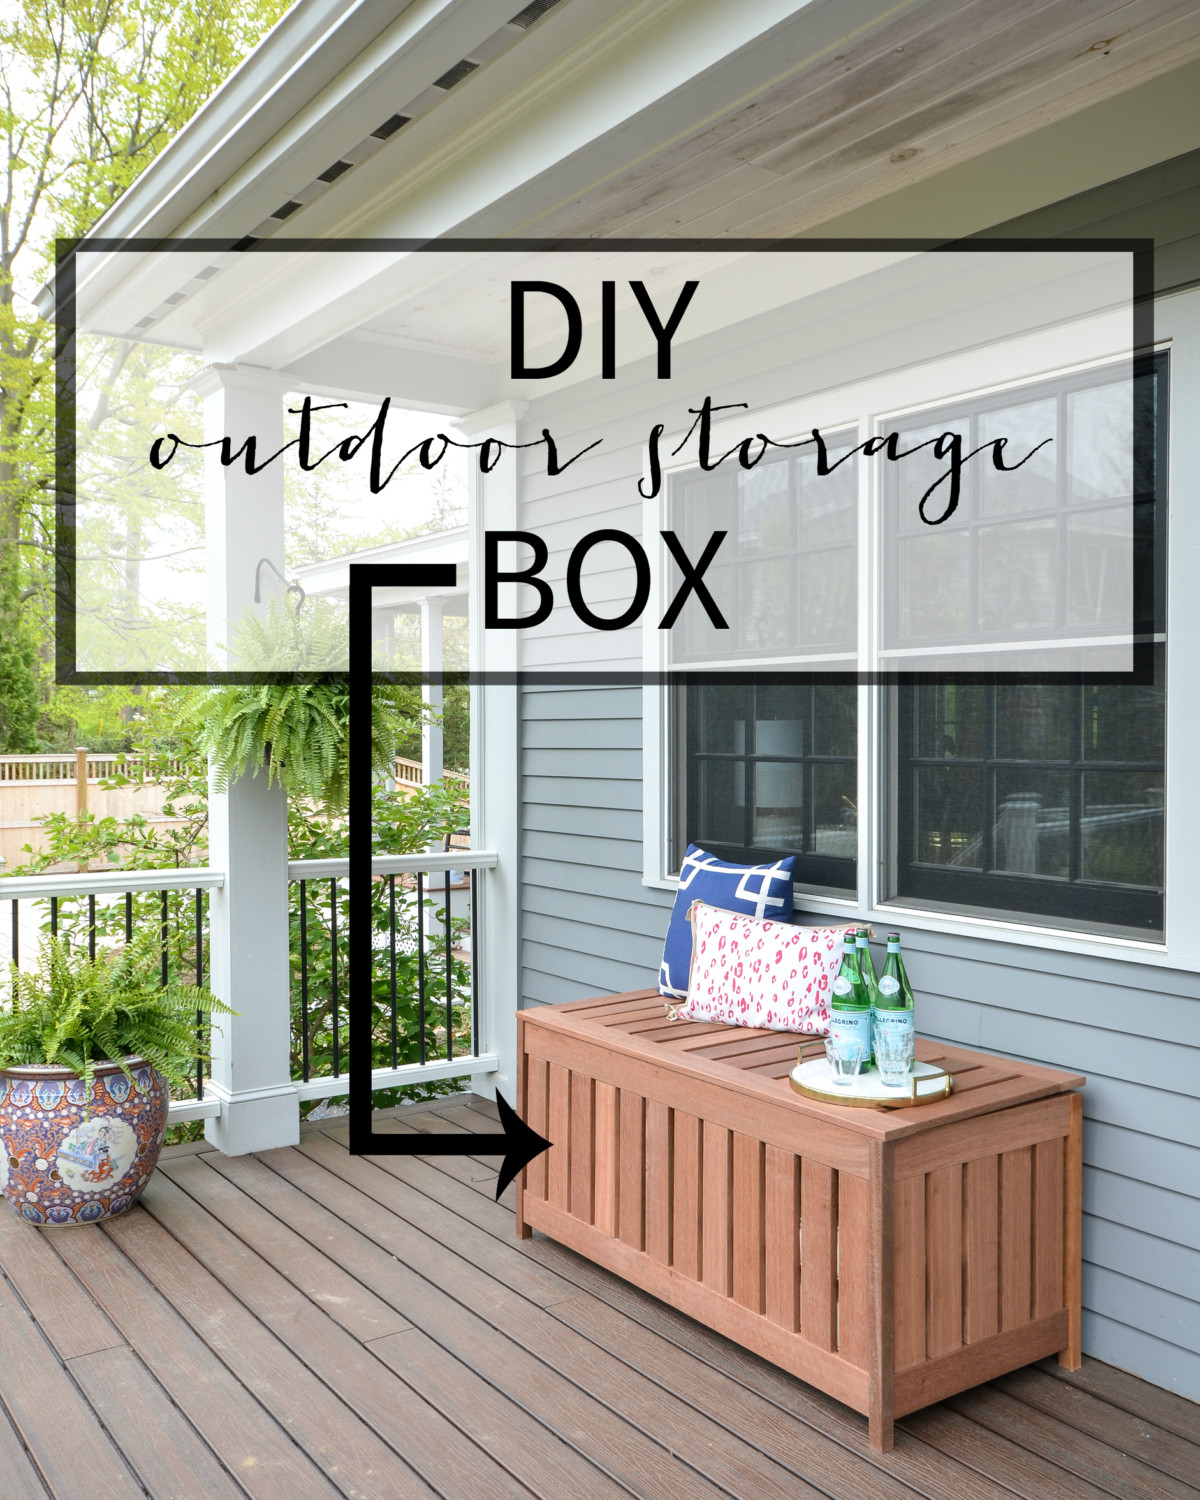 DIY Outdoor Bench Cushions
 DIY Outdoor Storage Box The Chronicles of Home